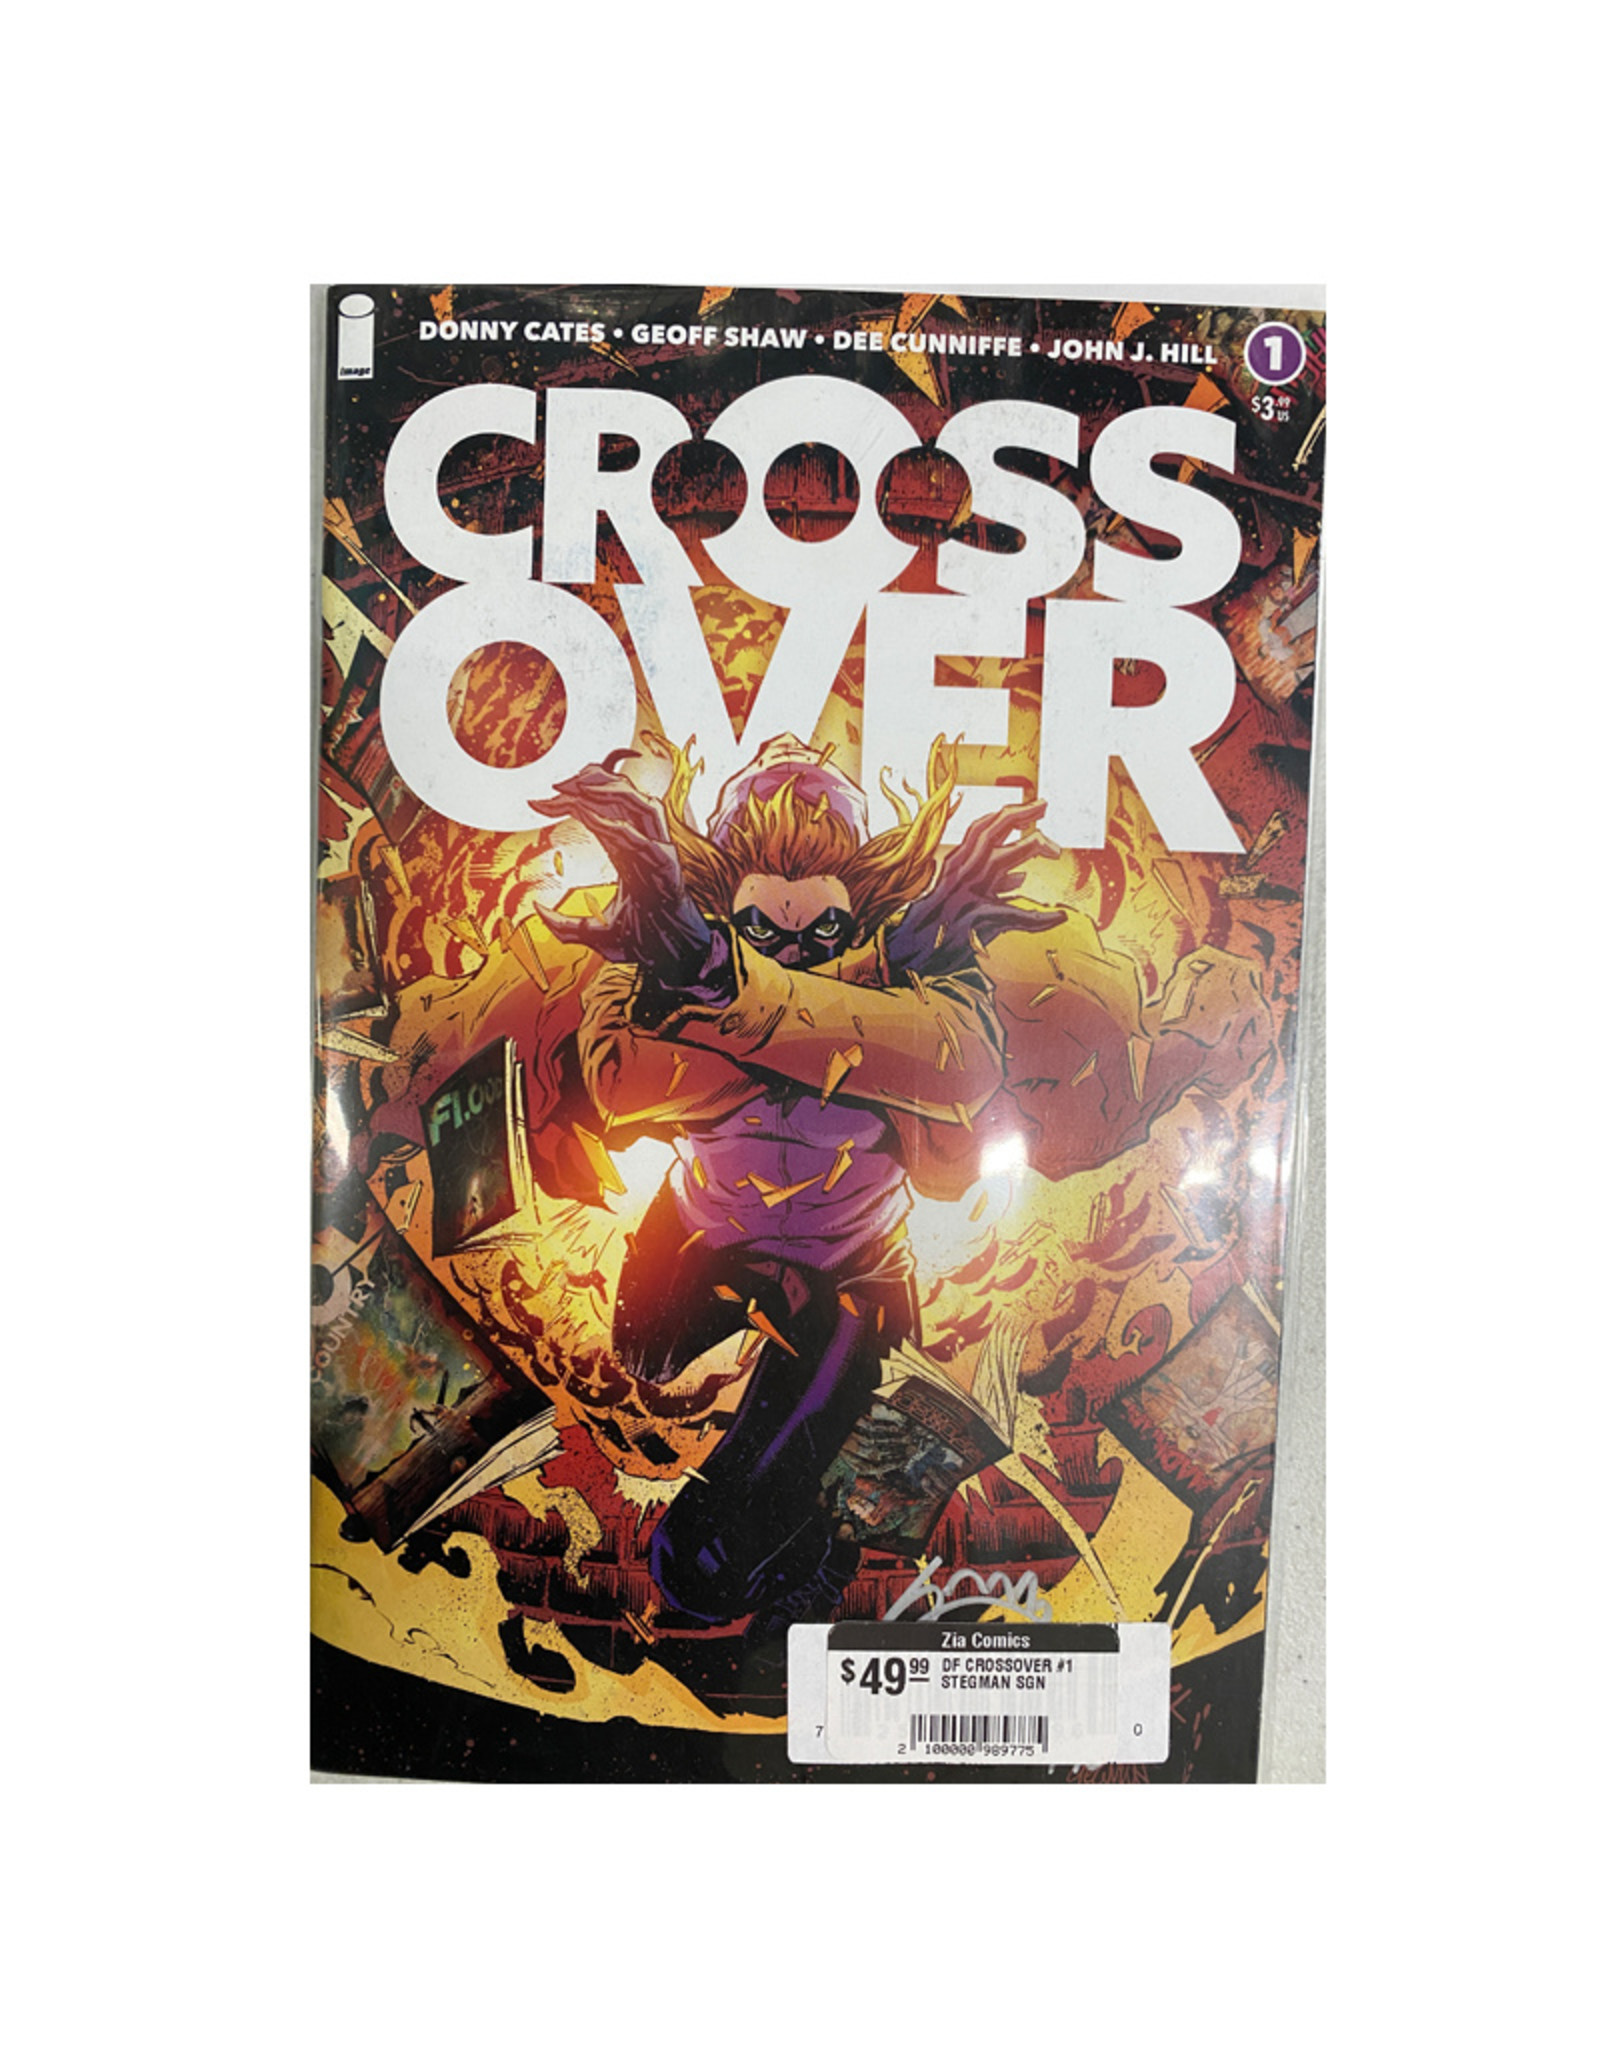 Dynamic Forces Crossover #1 signed by Stegman